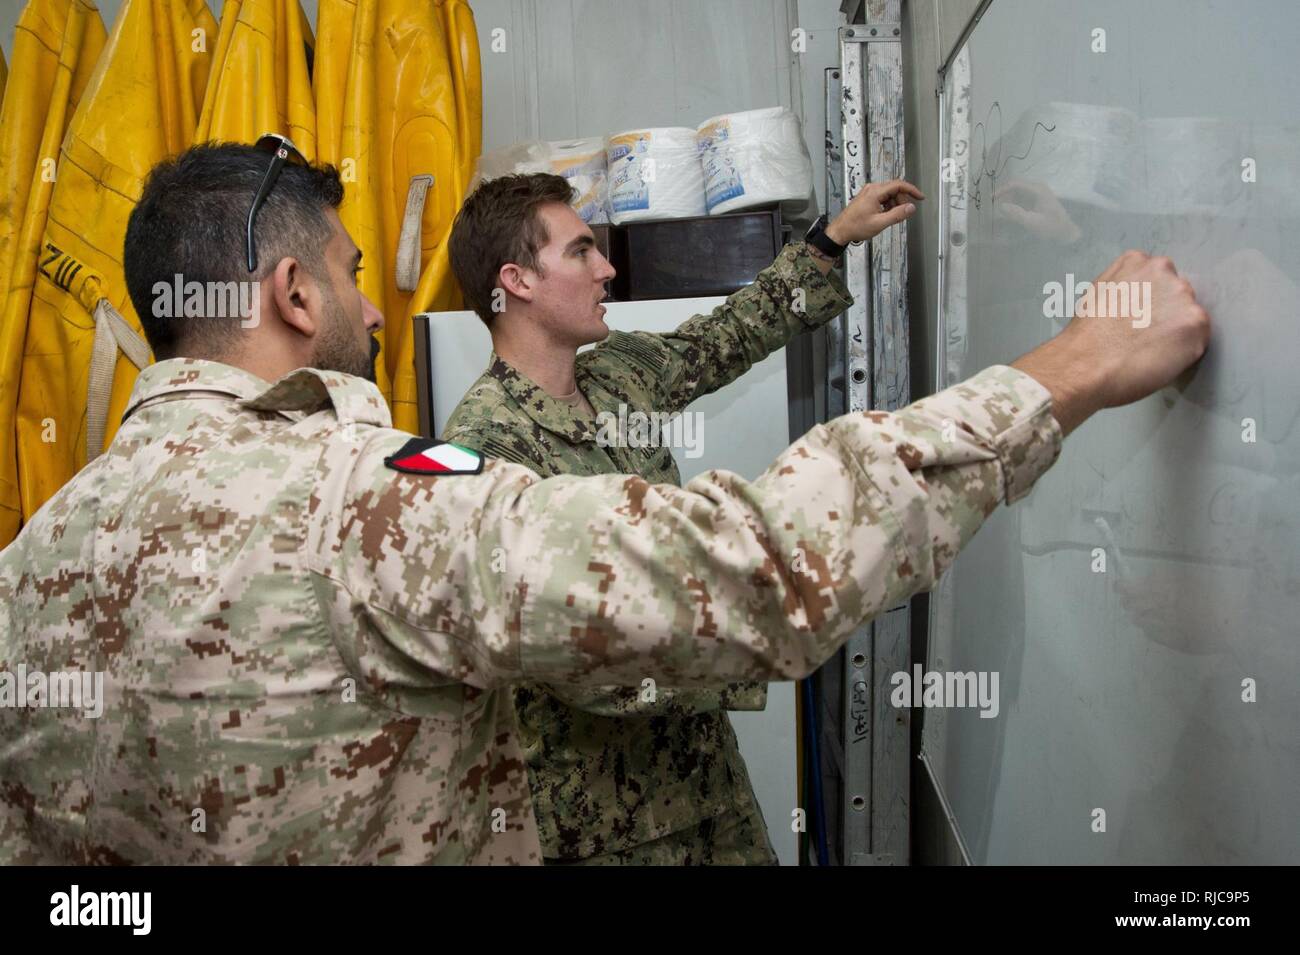 Mohammed Al-Ahmad Naval Base, (Jan. 7, 2018) Explosive Ordnance Disposal Technician 1st Class Kyle Hall, assigned to Commander, Task Group 56.1, exchanges sea mine procedures with a Kuwait Naval Force explosive ordnance disposal technician during a training evolution as part of exercise Eager Response 18. Eager Response 18 is a bilateral explosive ordnance disposal military exercise between the State of Kuwait and the United States. The exercise fortifies military-to-military relationships between the Kuwait Naval Force and U.S. Navy, advances the operational capabilities of Kuwaiti and U.S. f Stock Photo